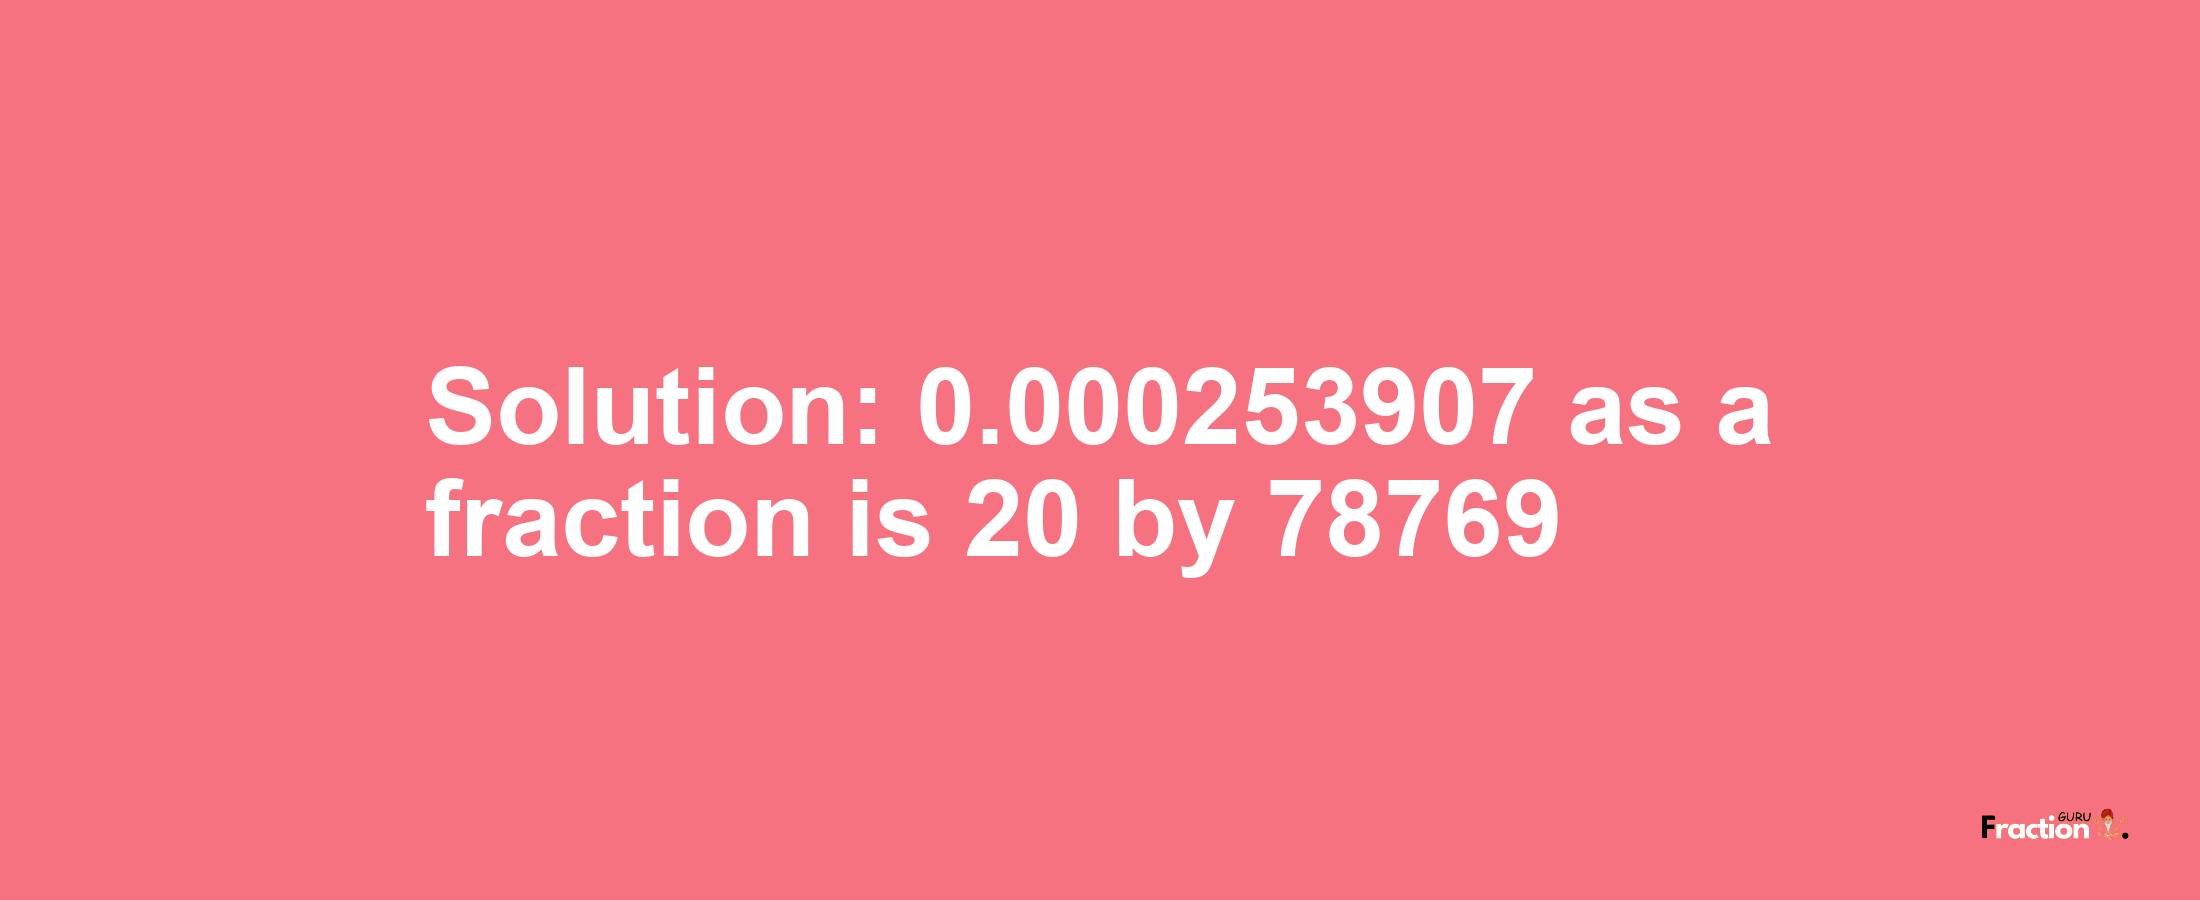 Solution:0.000253907 as a fraction is 20/78769